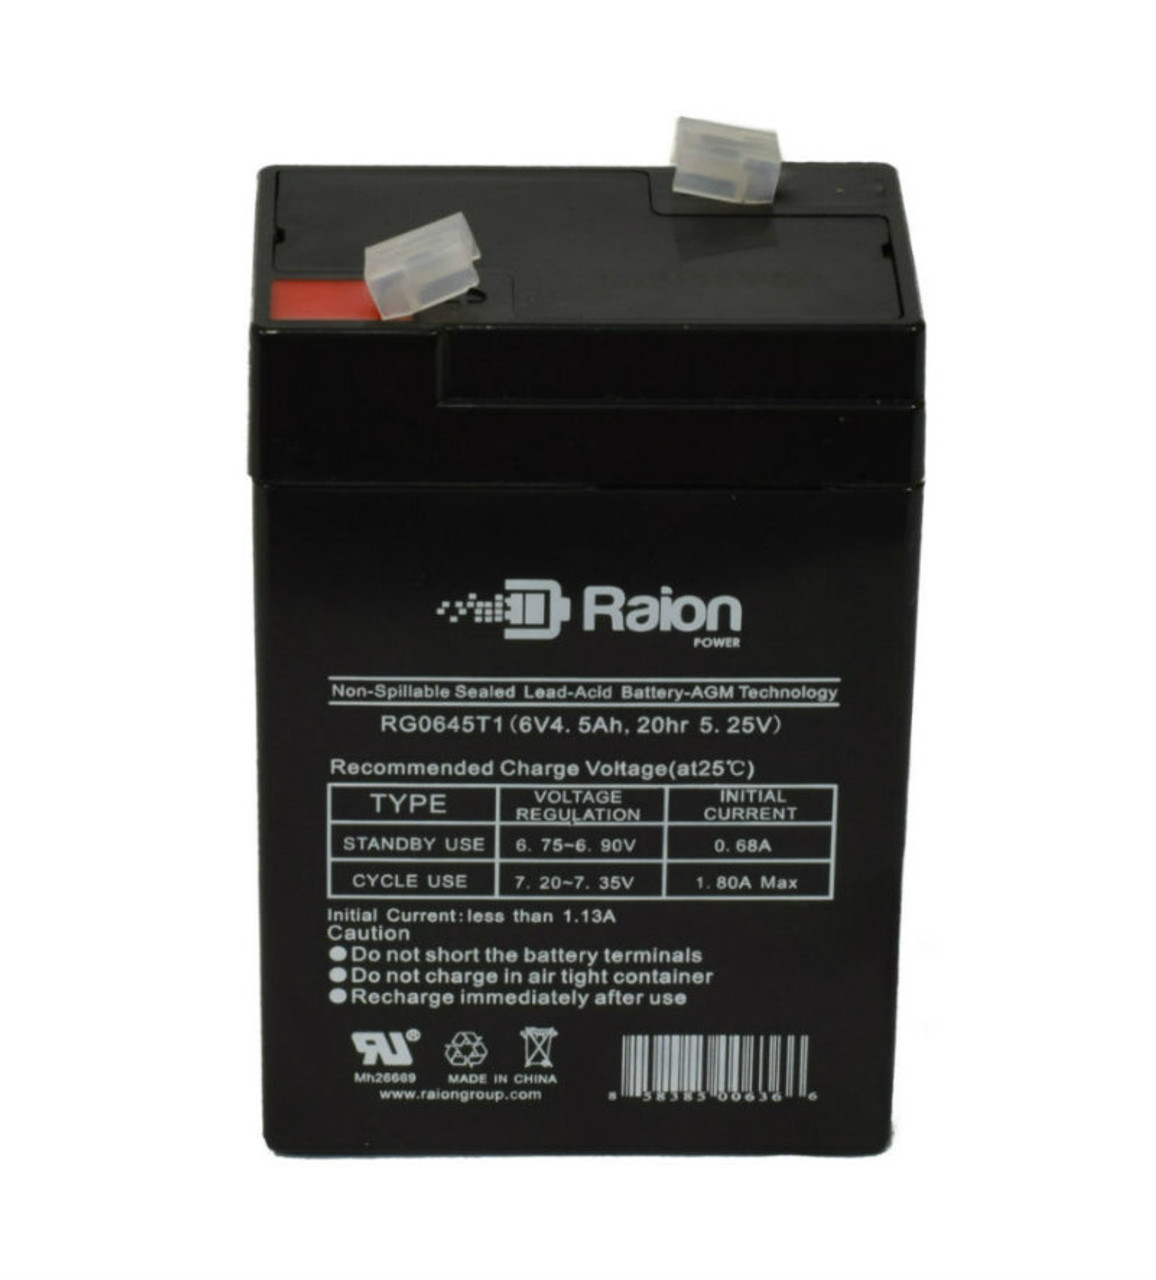 Raion Power RG0645T1 Replacement Battery Cartridge for Technacell EP1640